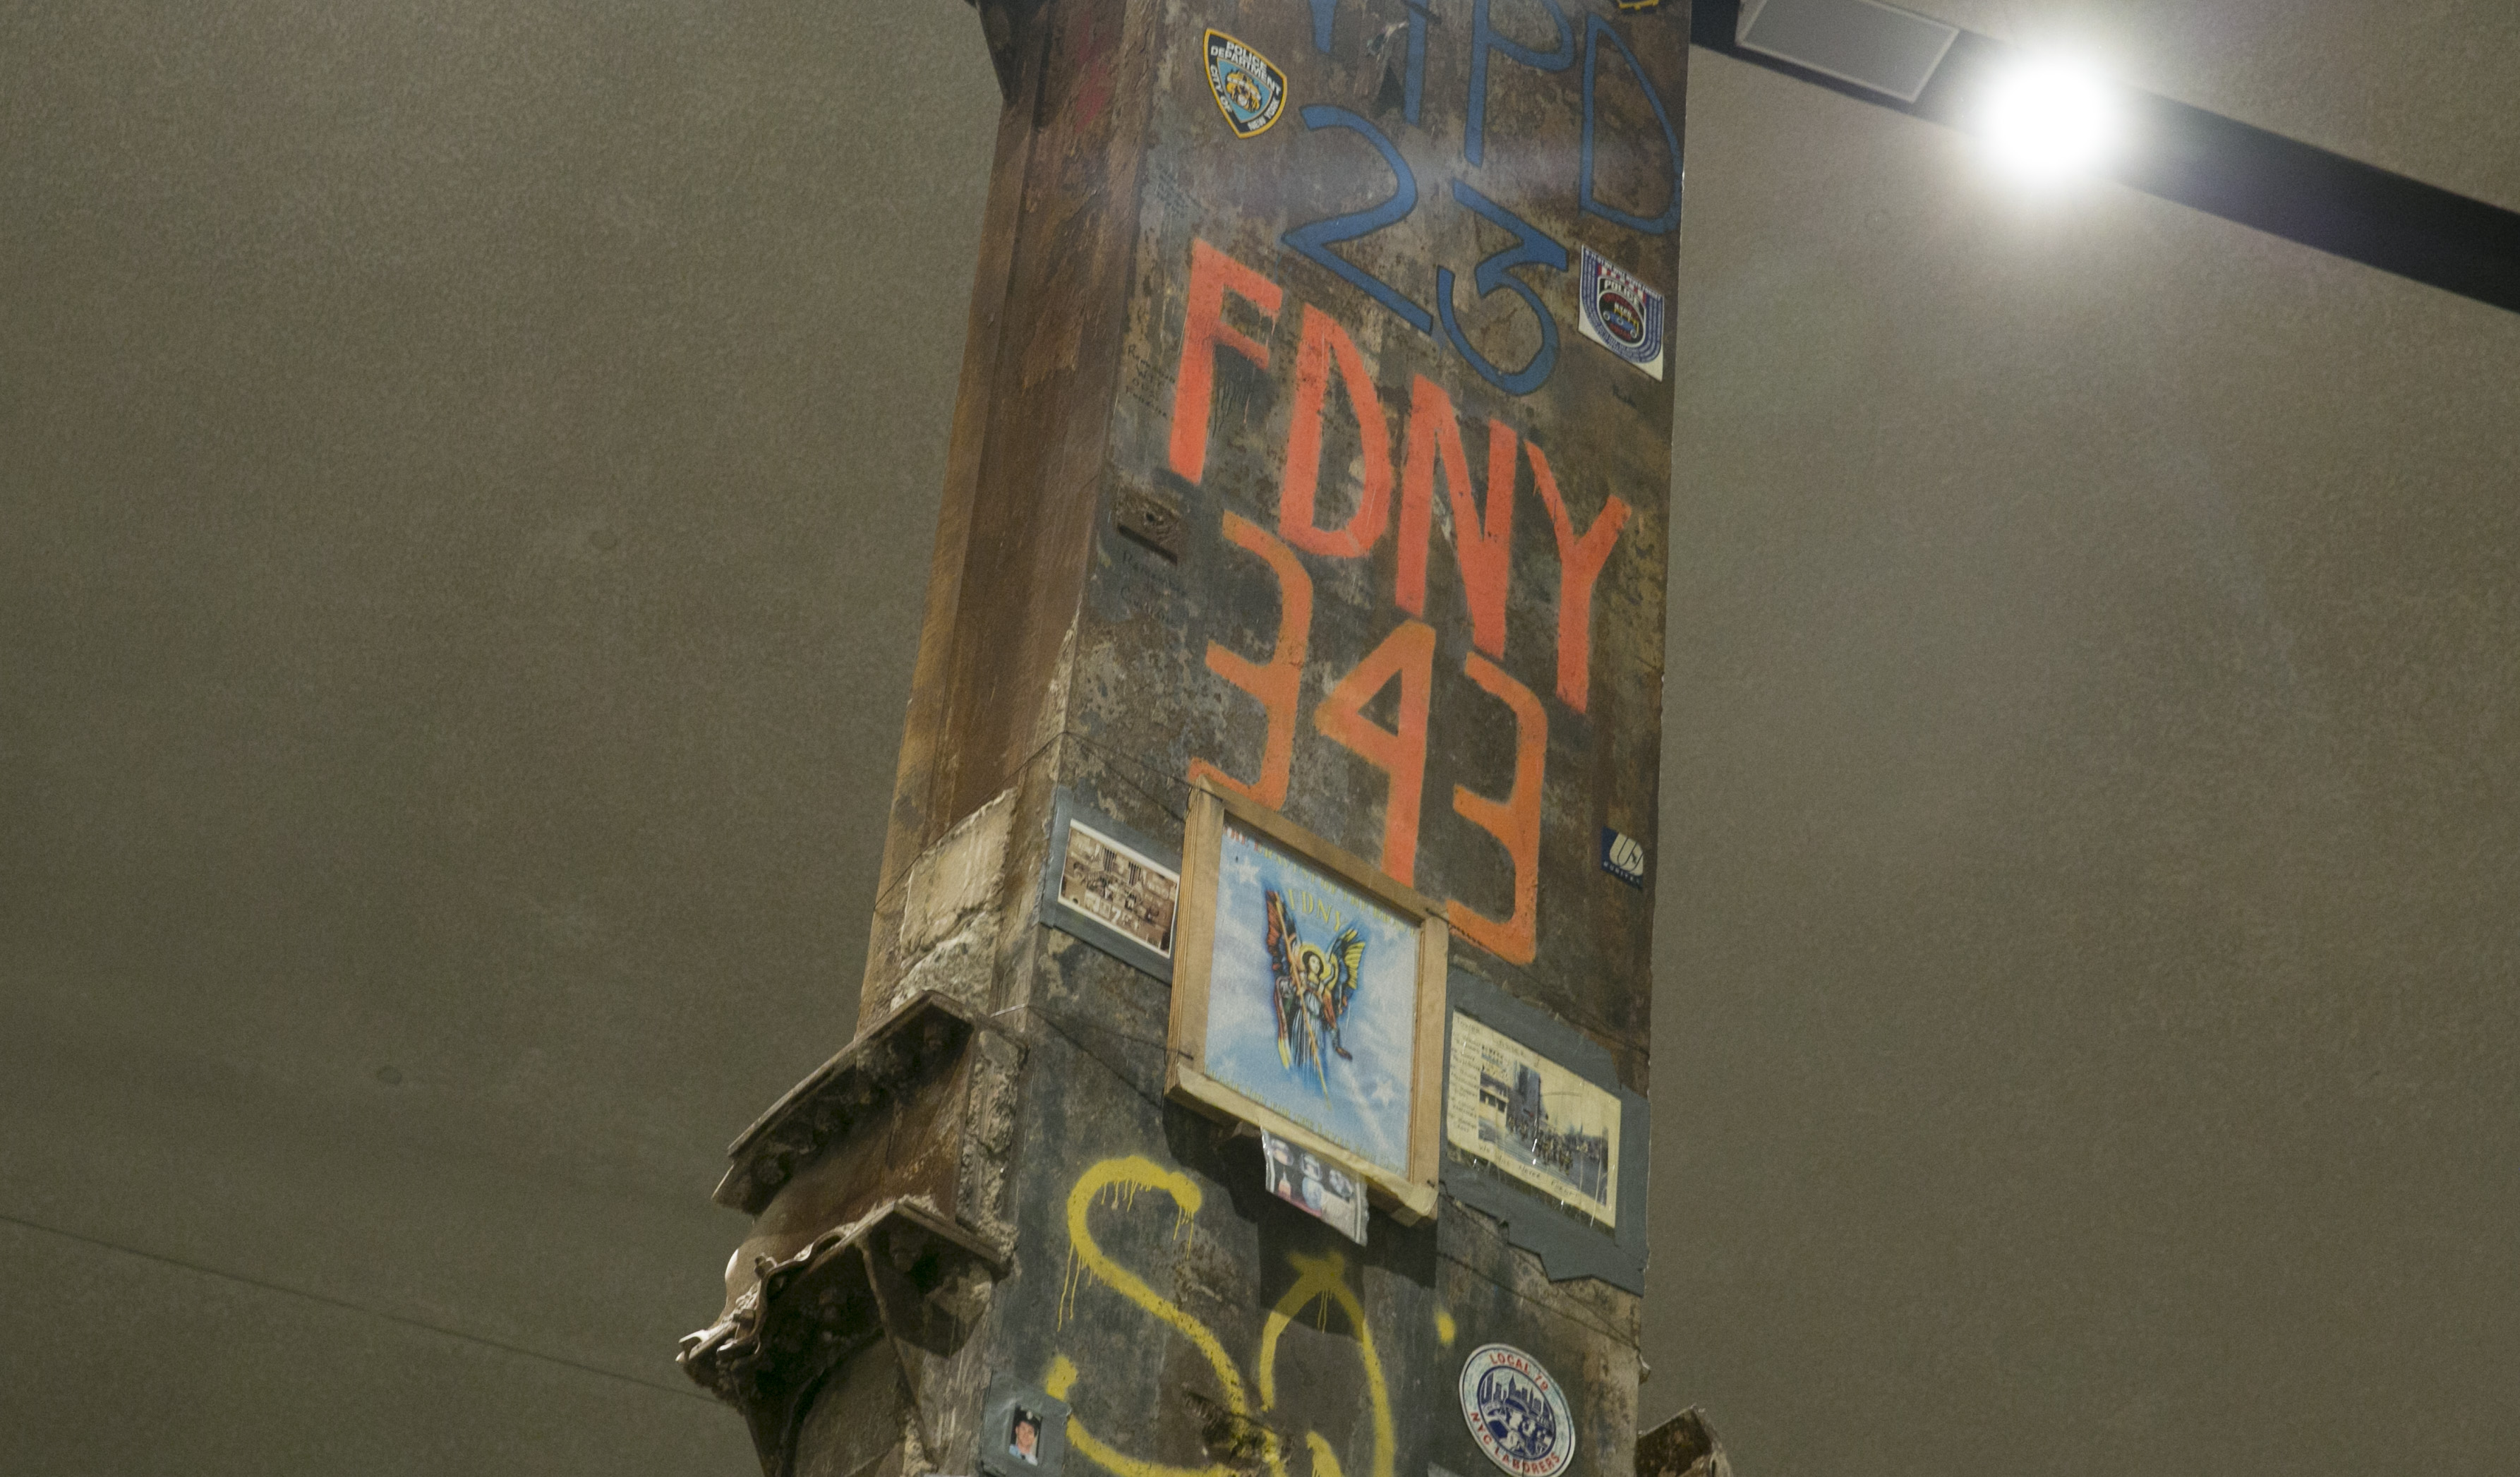 The “firefighters angel” poster is seen on the Last Column in Foundation Hall.